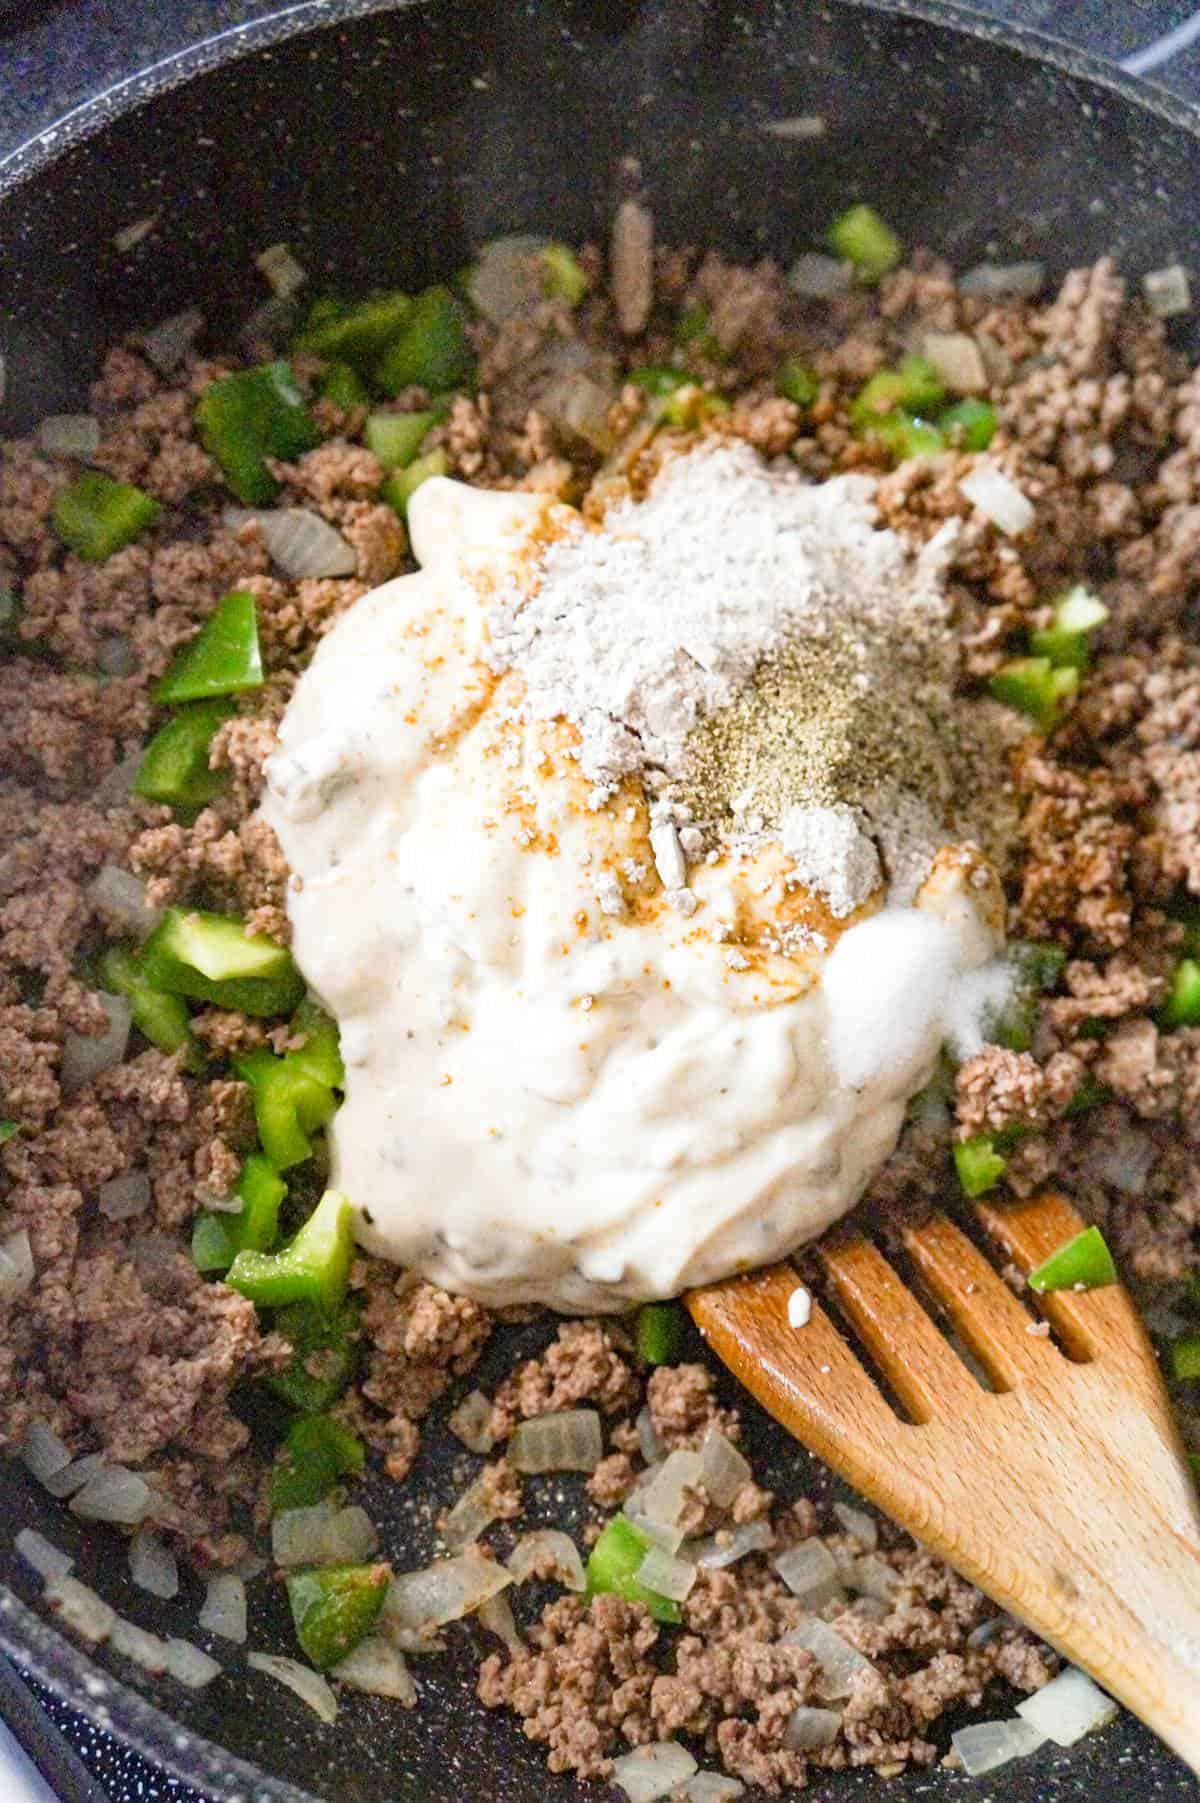 spices and condensed cream of mushroom soup on top of cooked ground beef in a baking dish